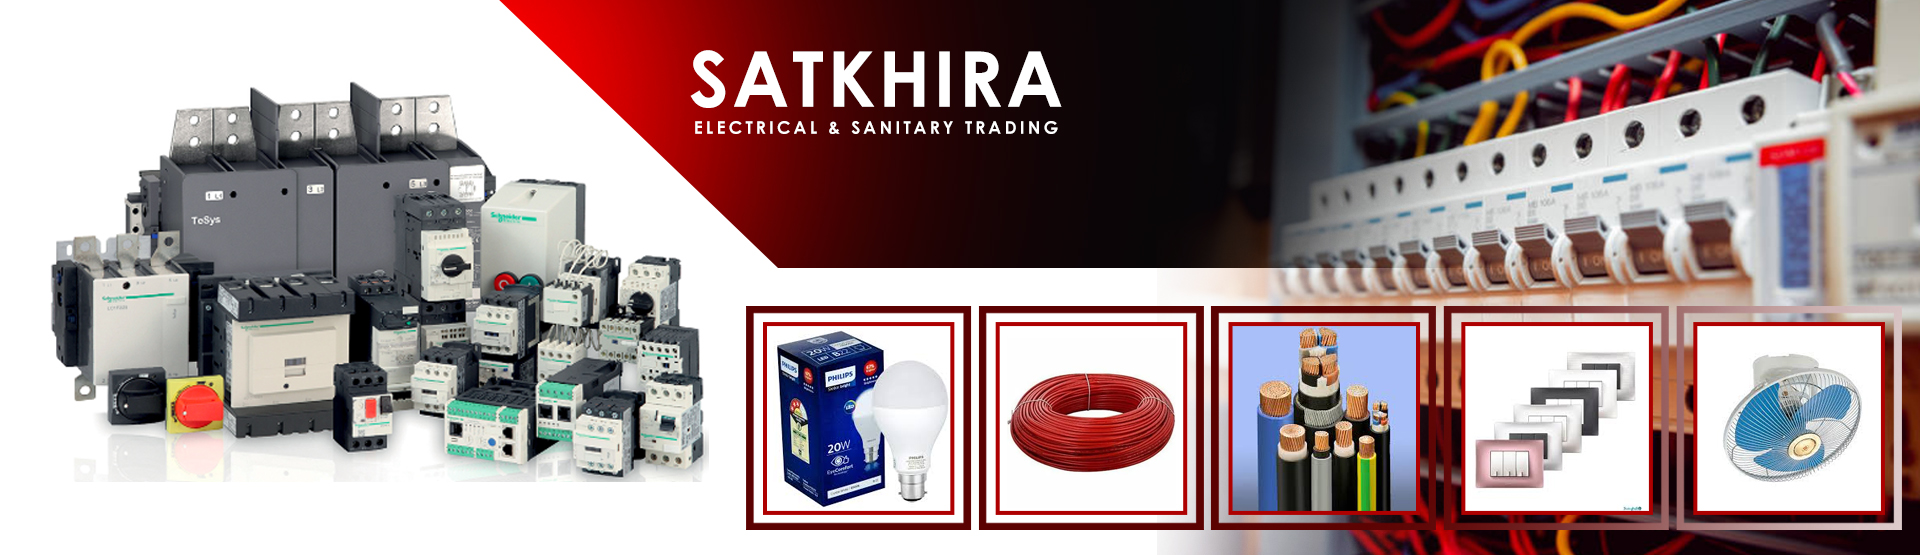 SATKHIRA ELECTRICAL AND SANITARY TRADING